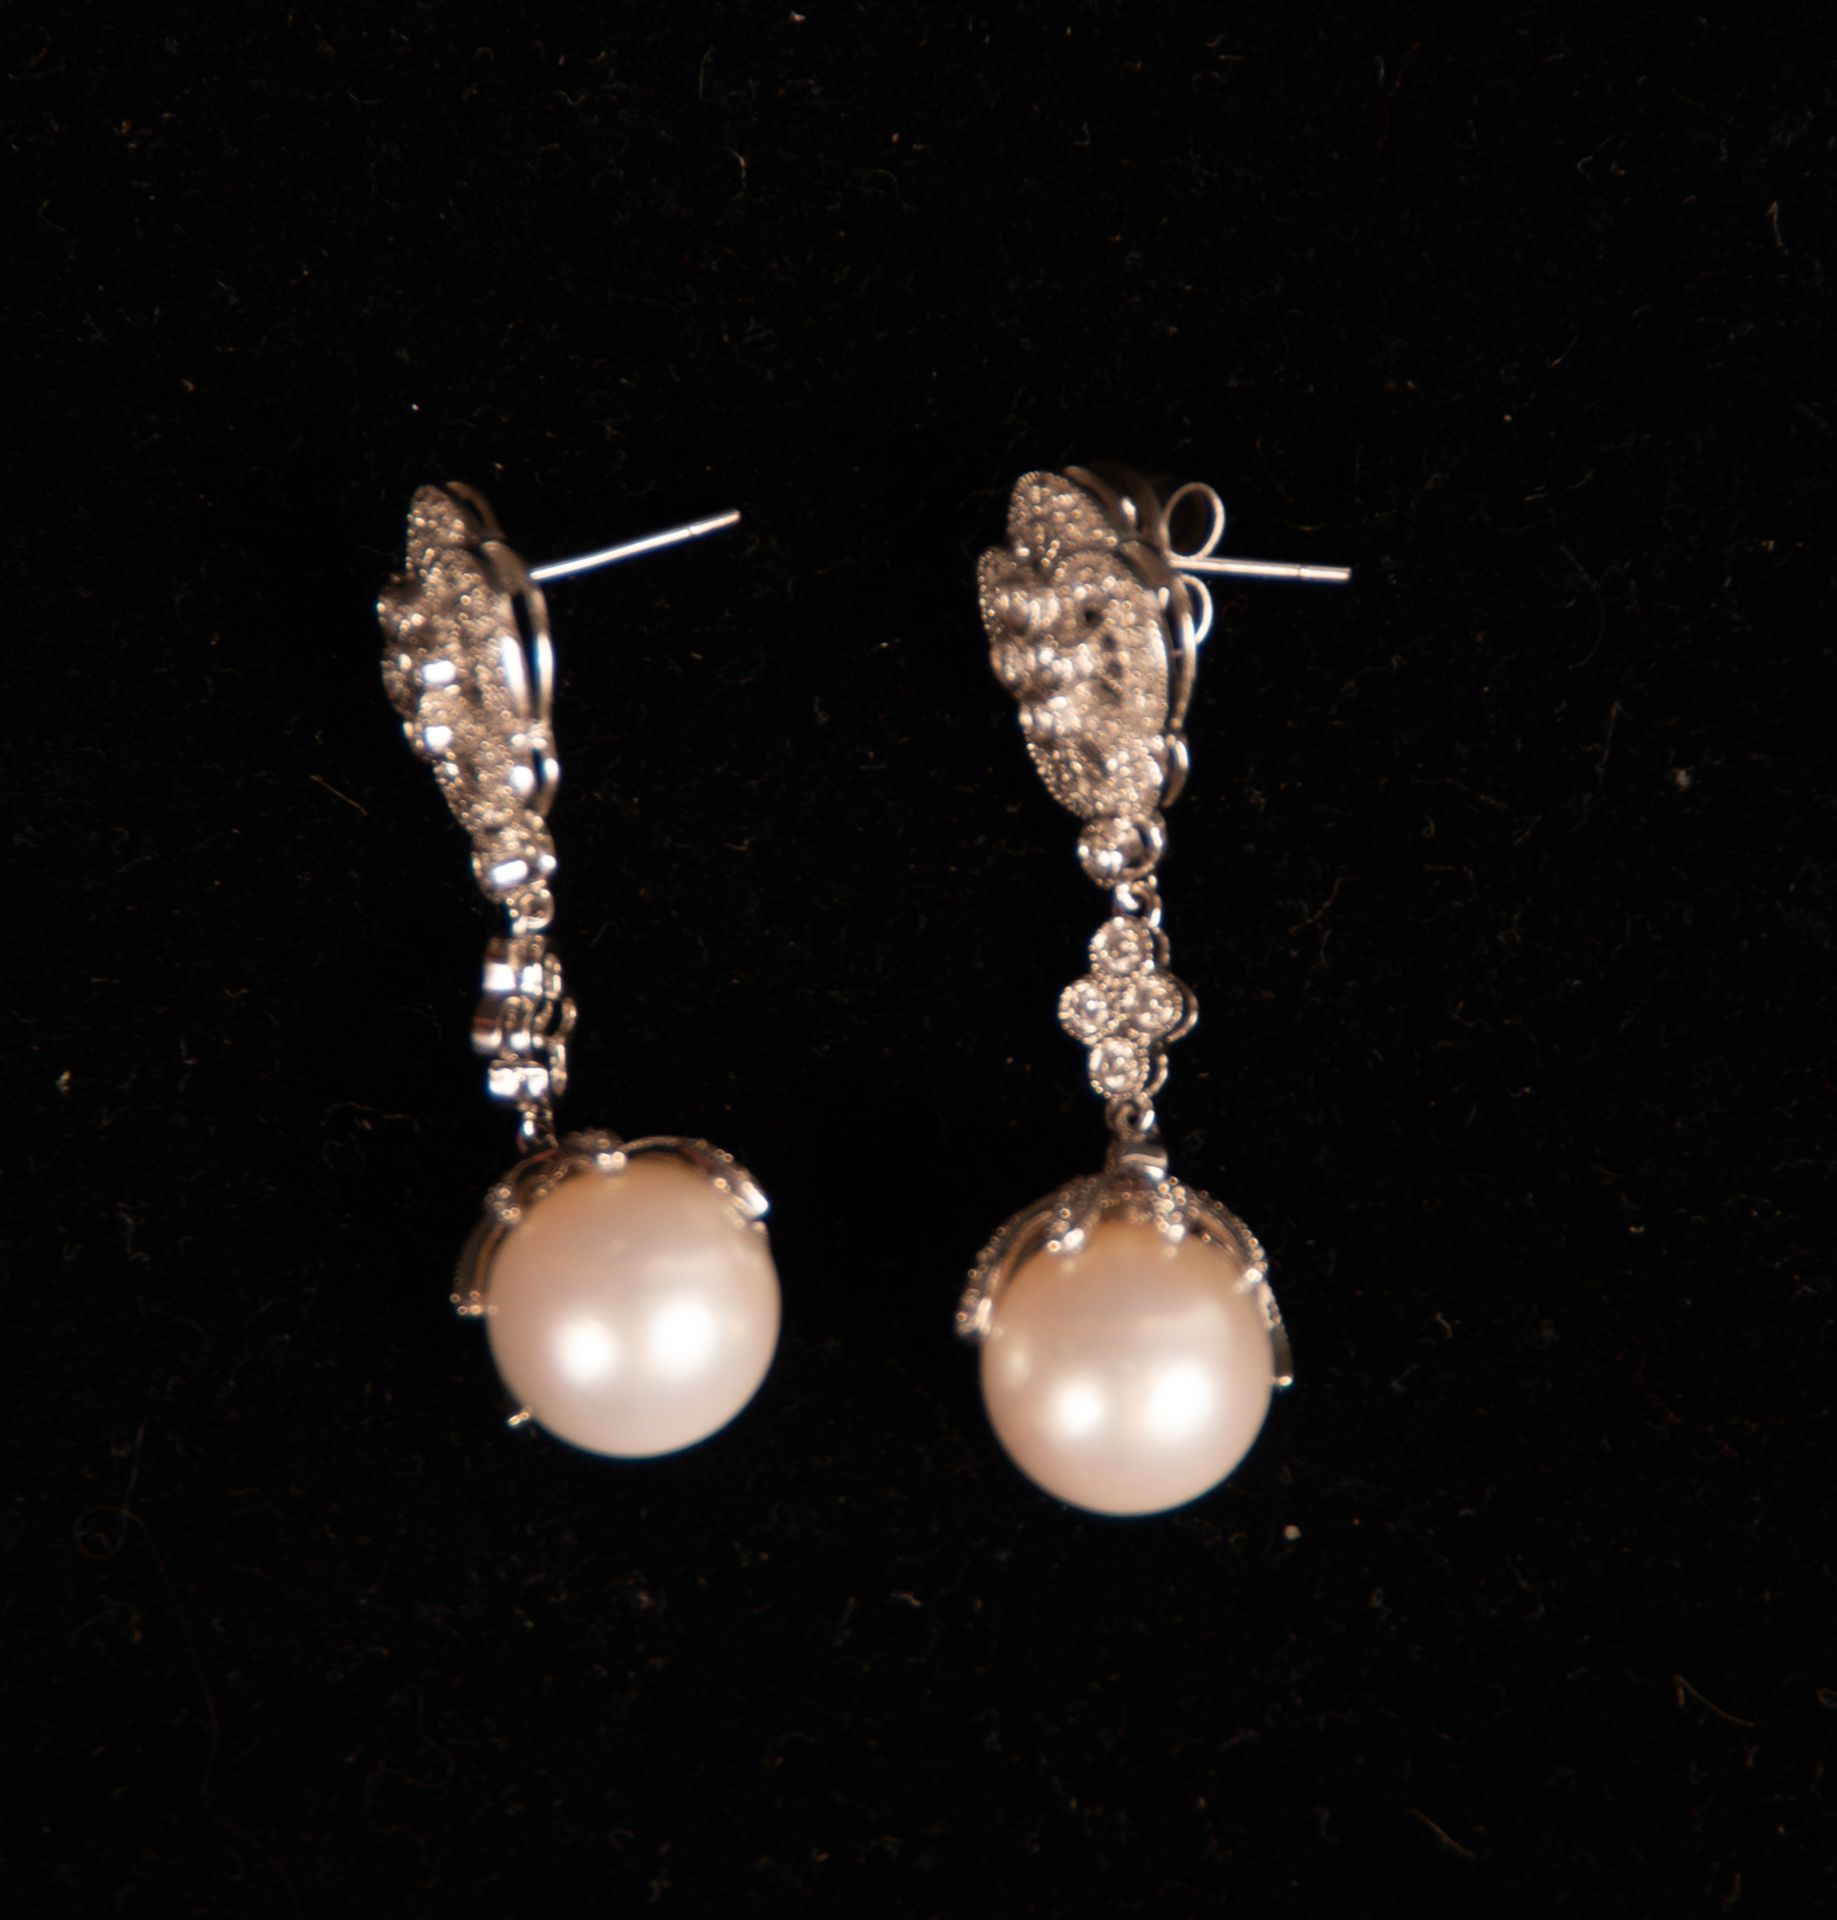 Pair of Clover-shaped Earrings with Crimped Pearls - Image 2 of 5